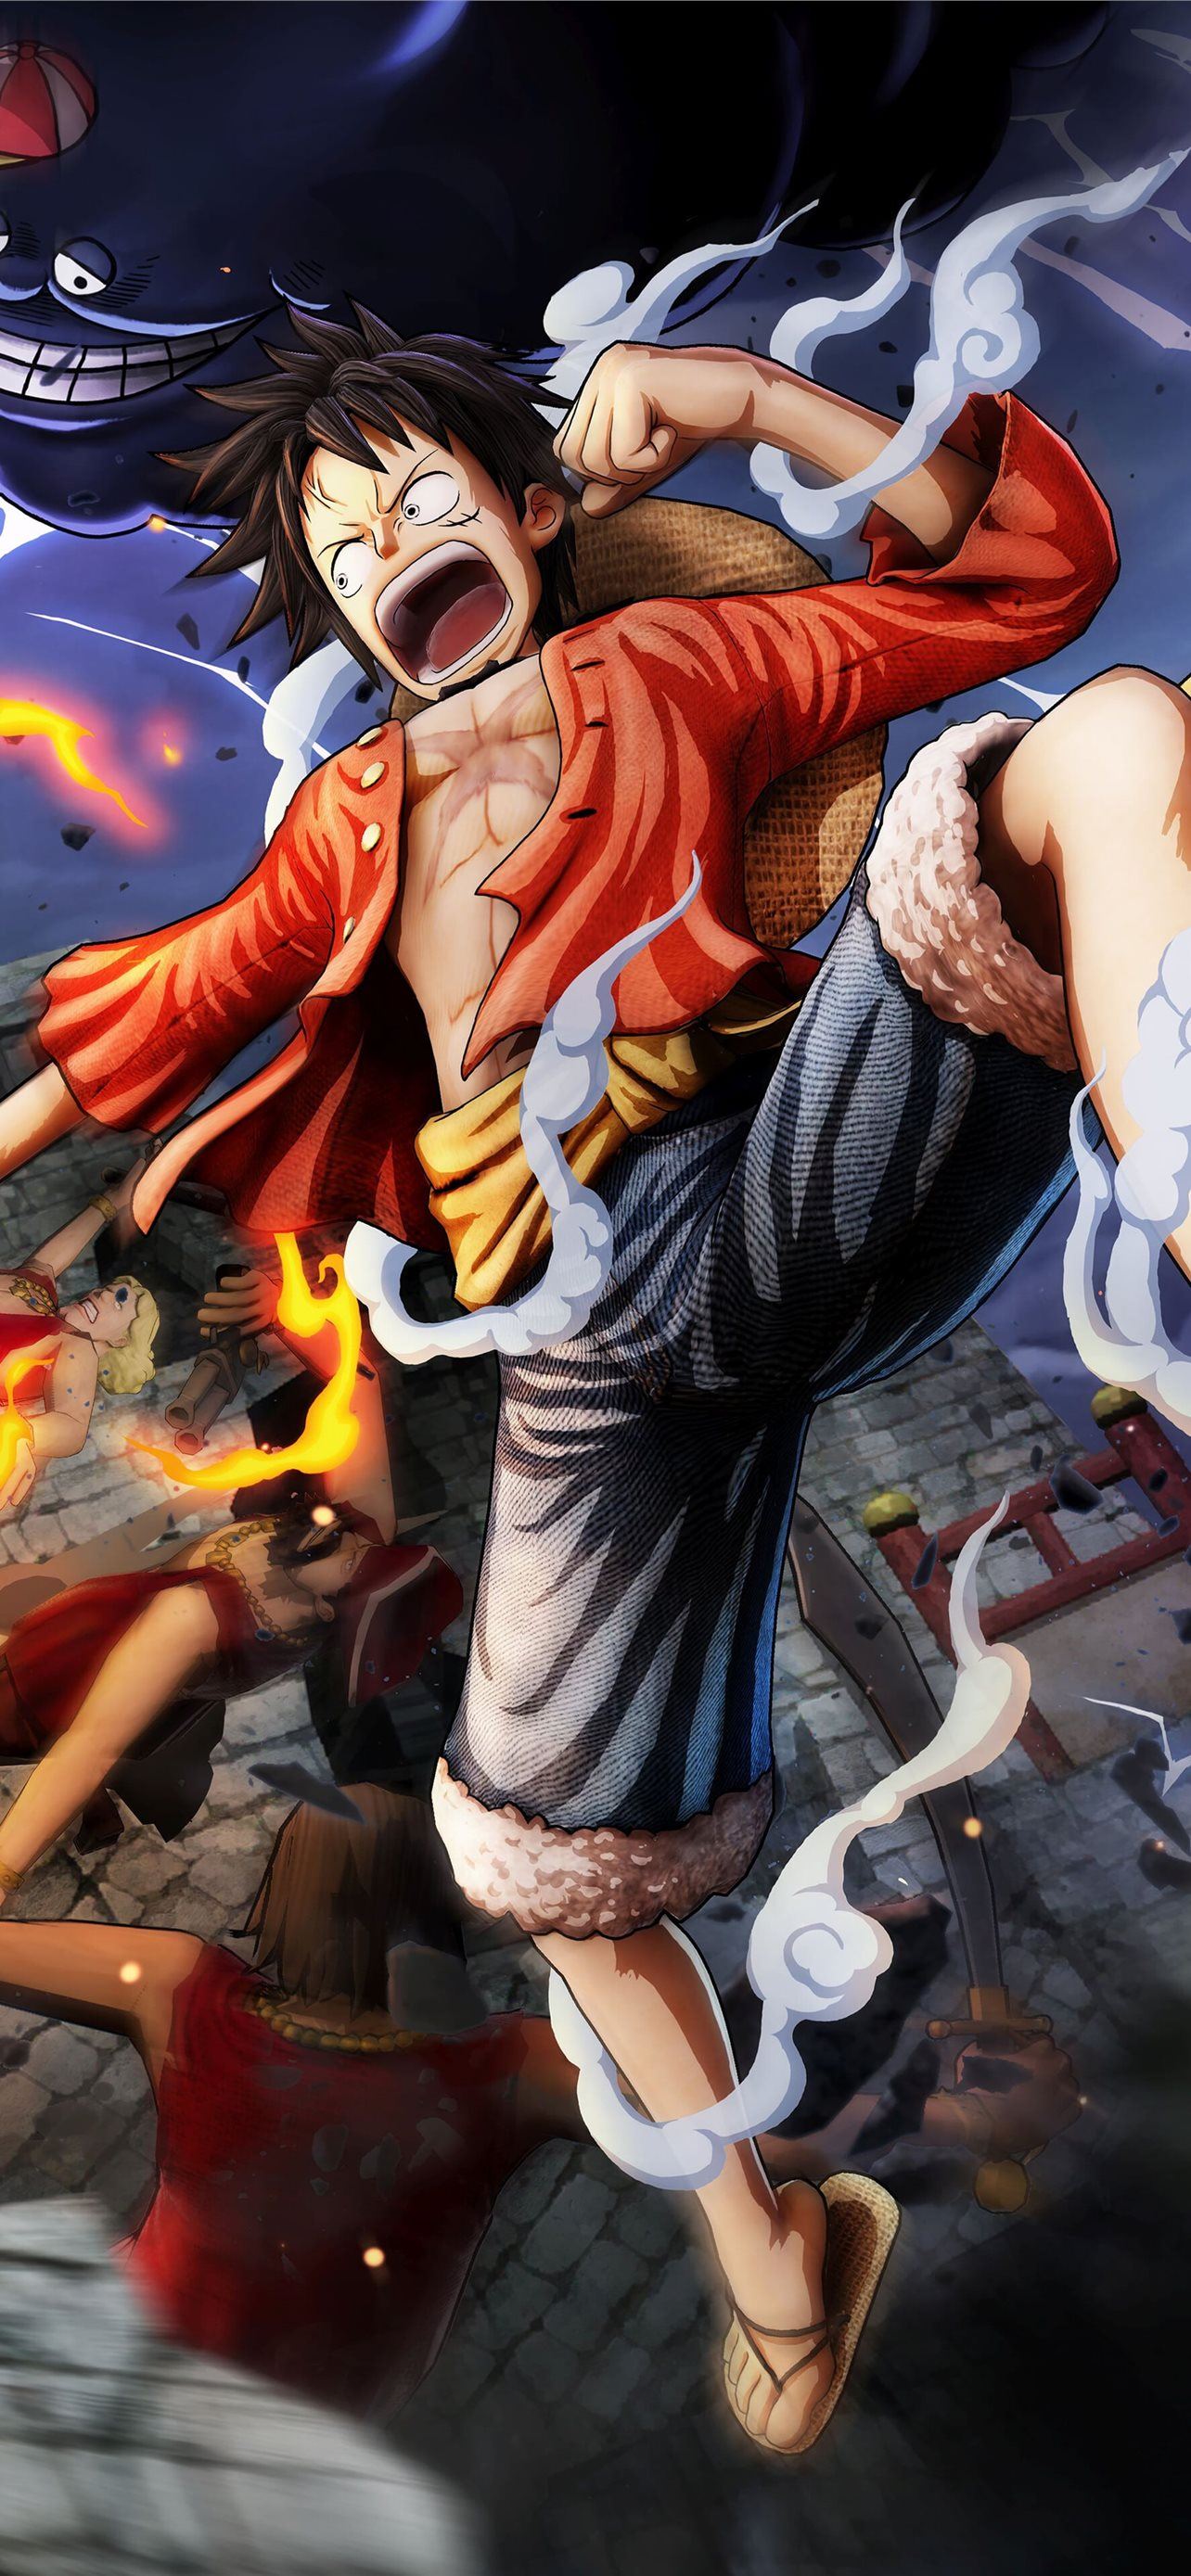 Anime One Piece KoLPaPer Awesome Free HD iPhone Wallpaper Free Download